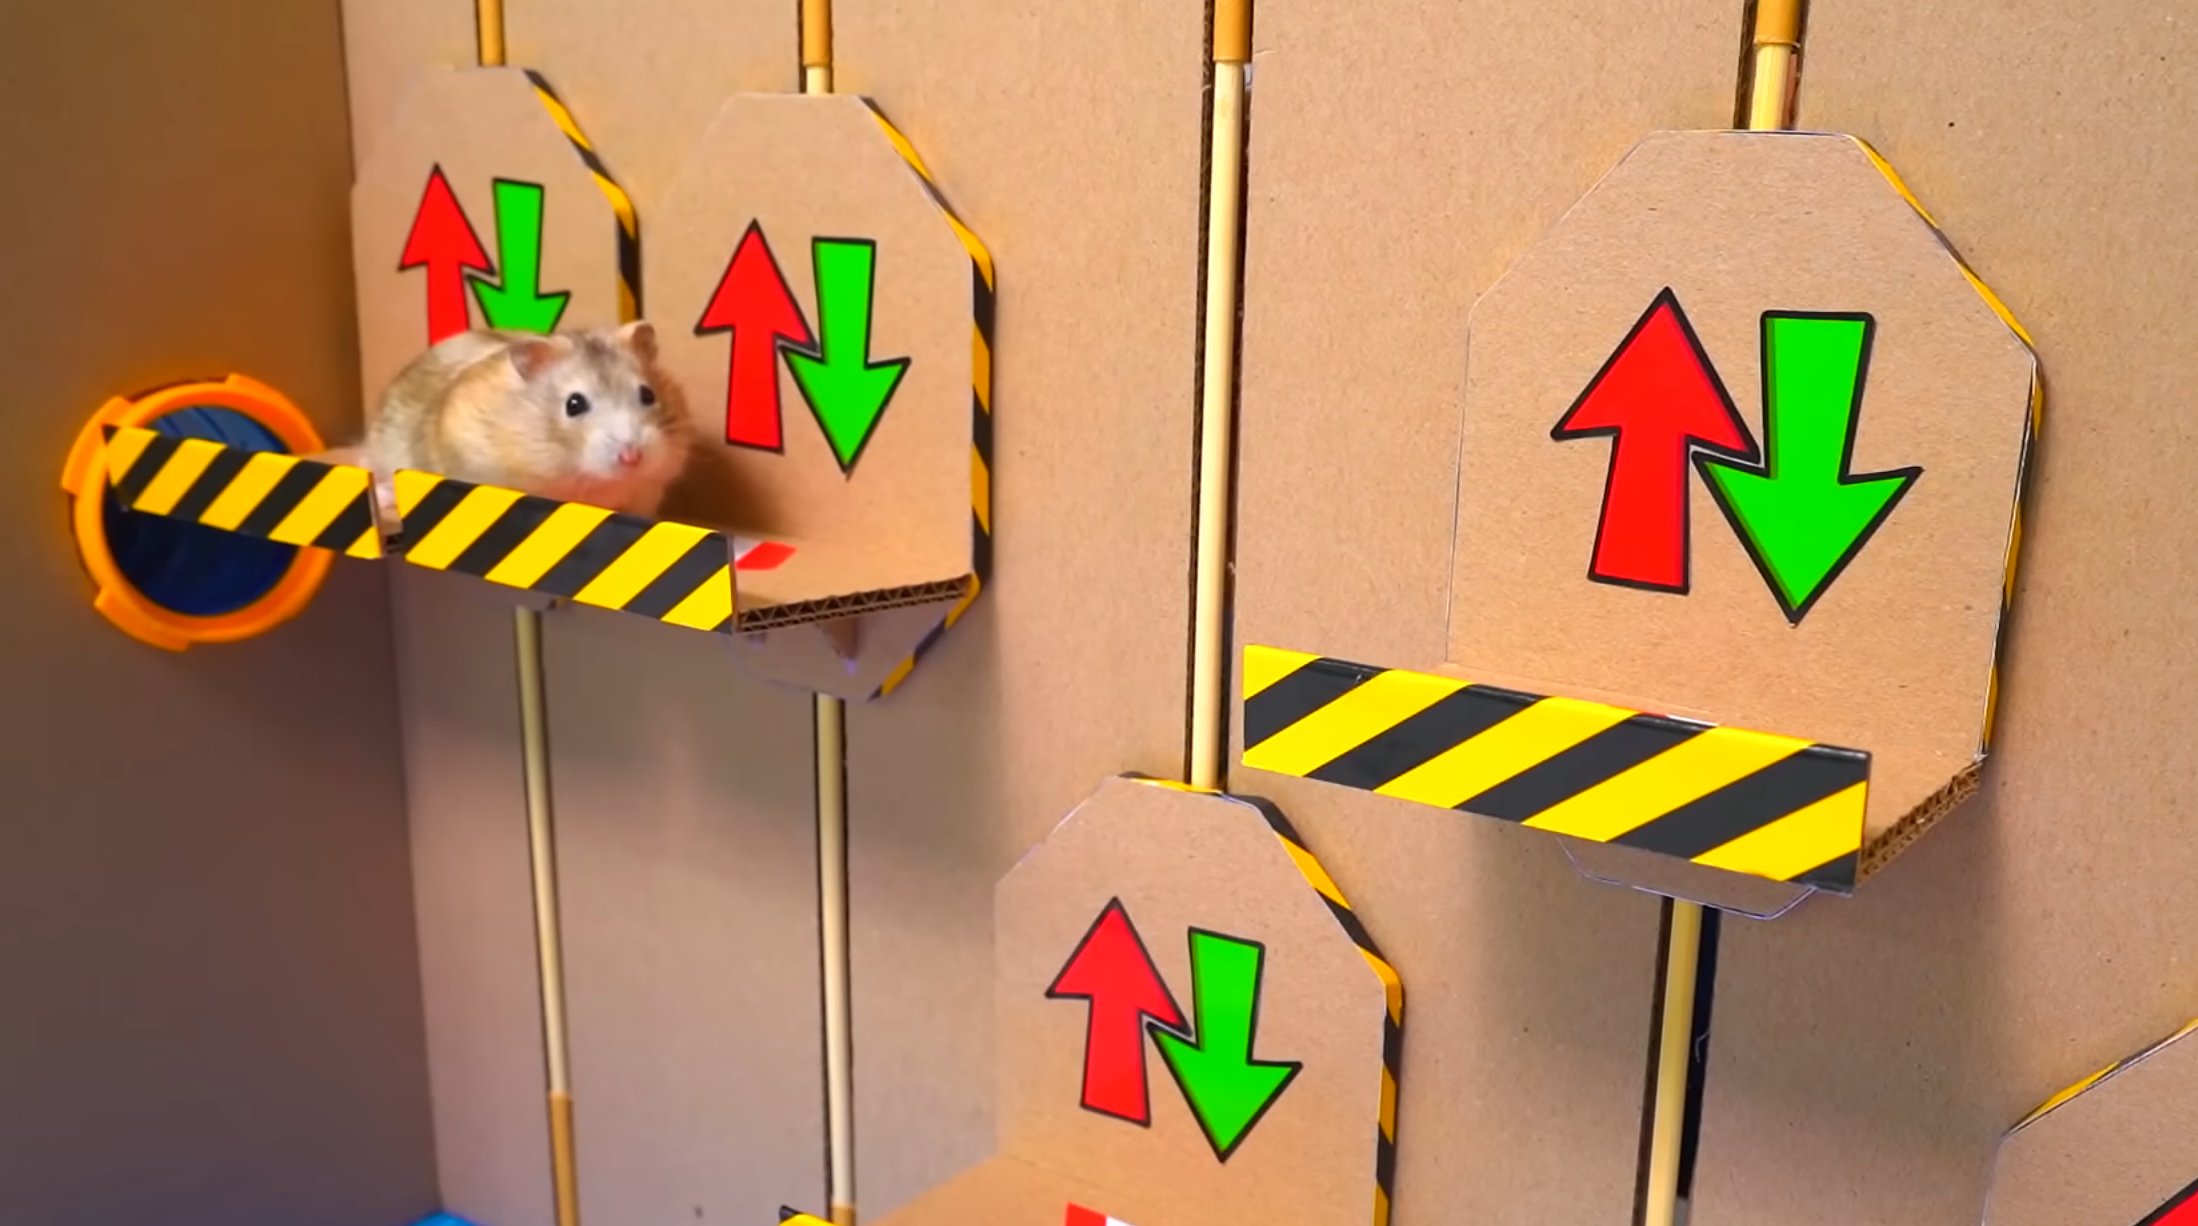 A hamster in an adventure game.